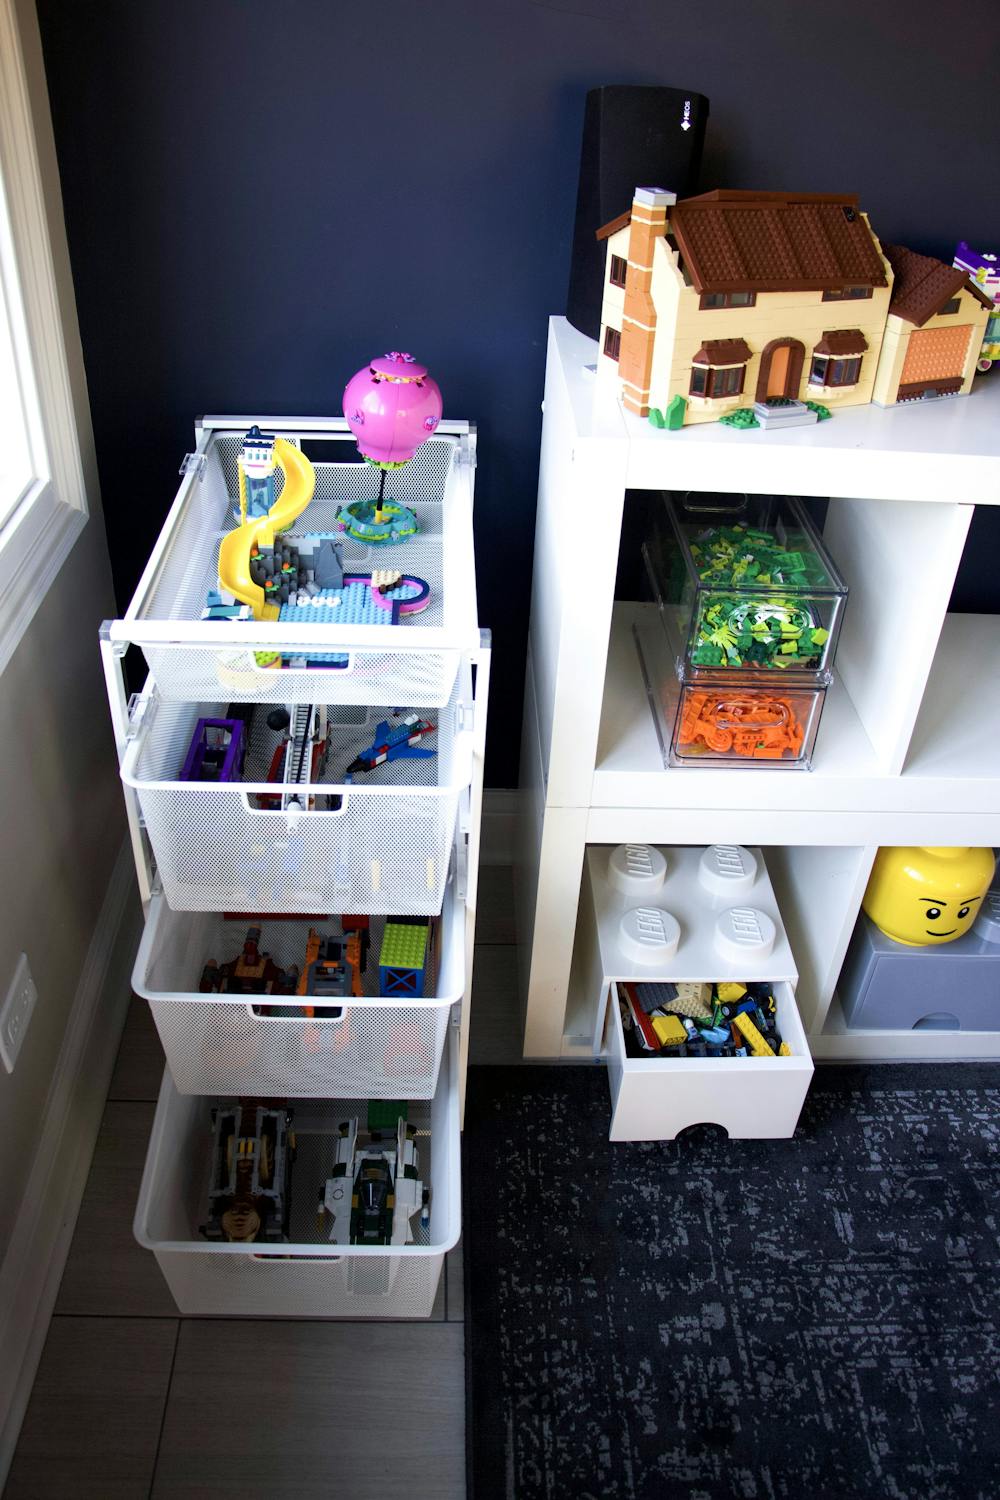 13 of the Best LEGO Storage Ideas for Families - Tinybeans